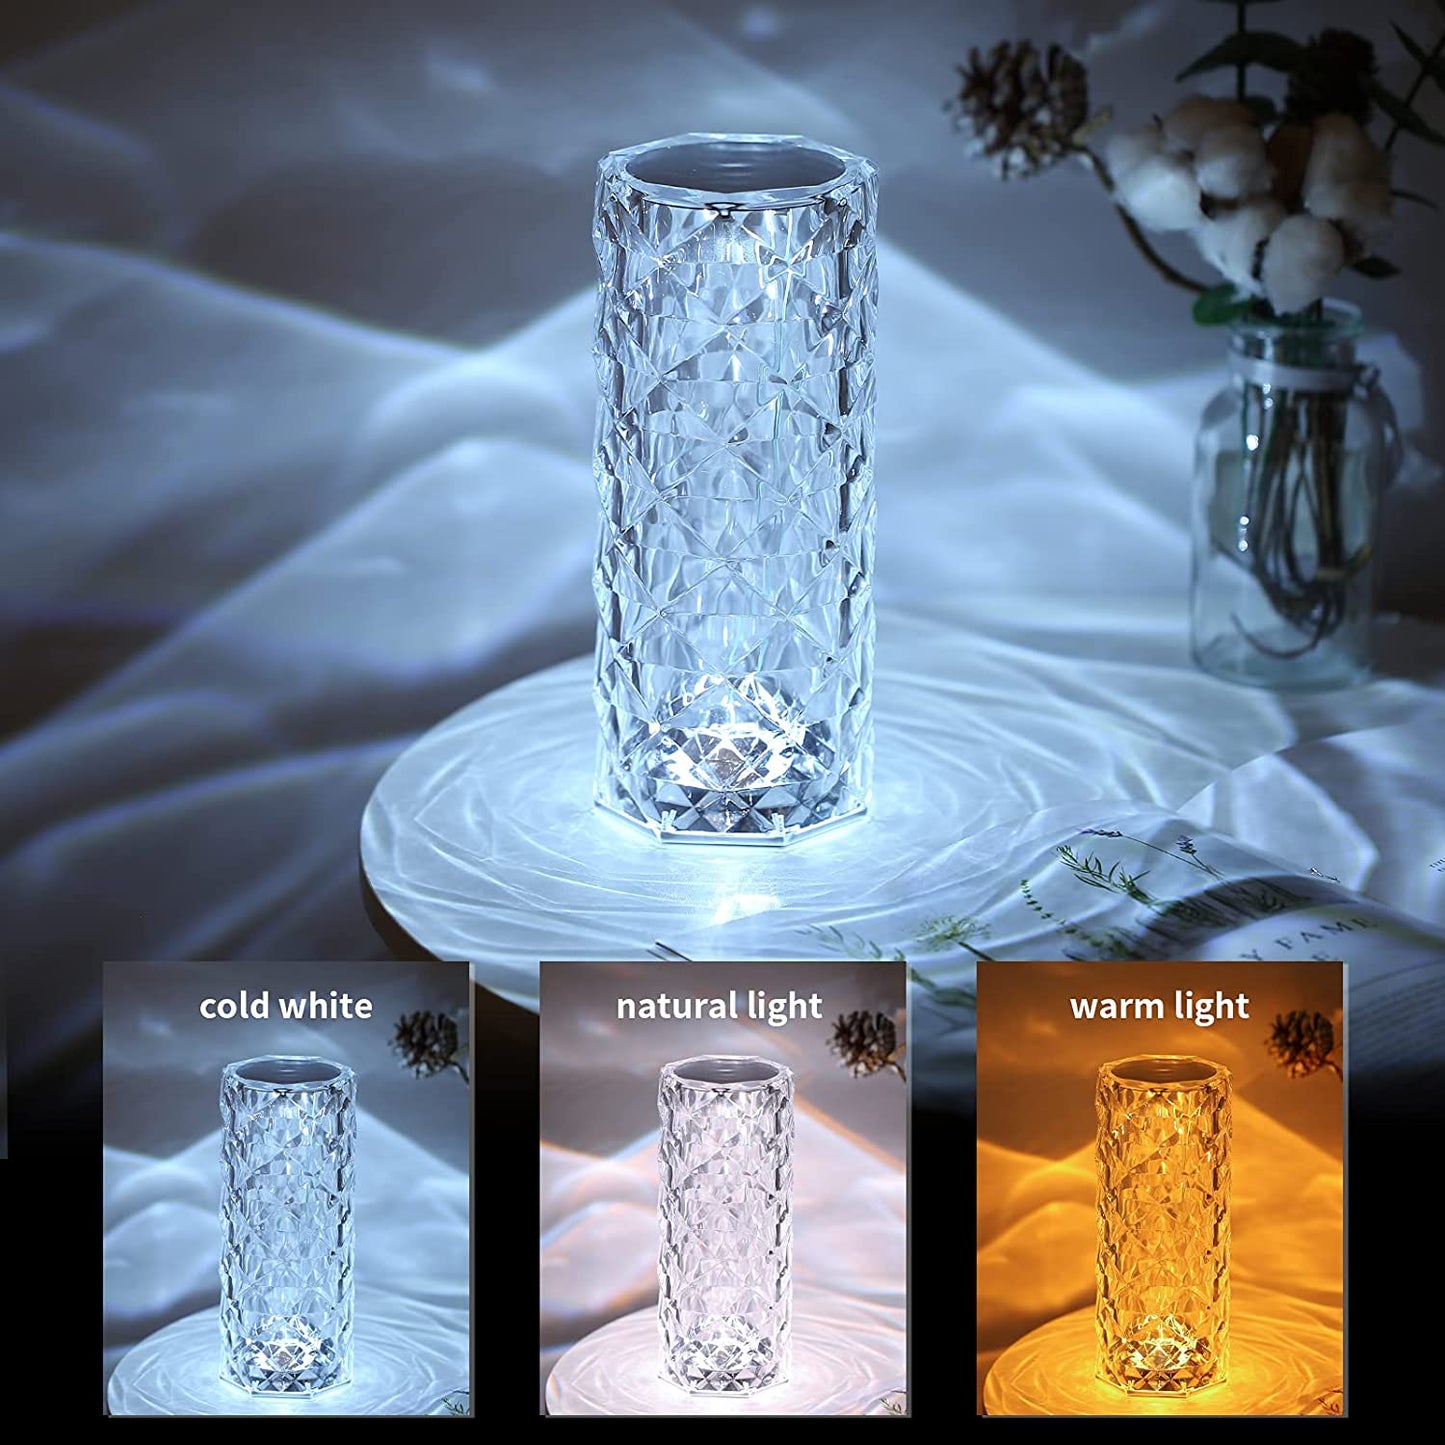 CRYSTAL ROSE LAMP (TOUCH)